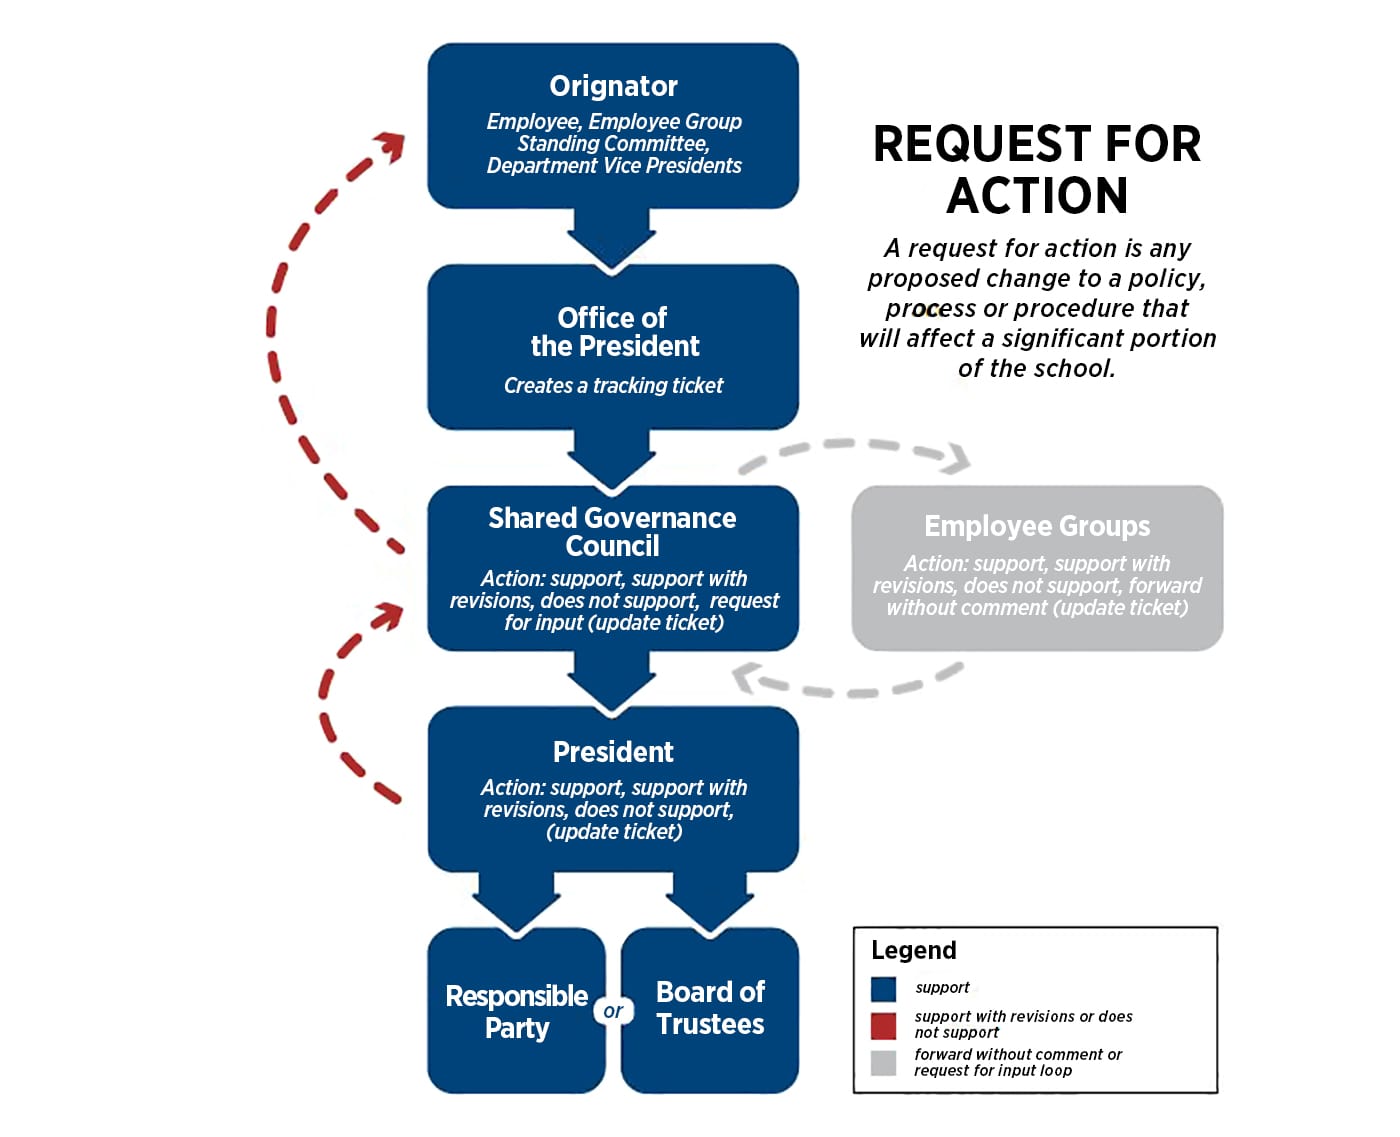 Request for Action chart